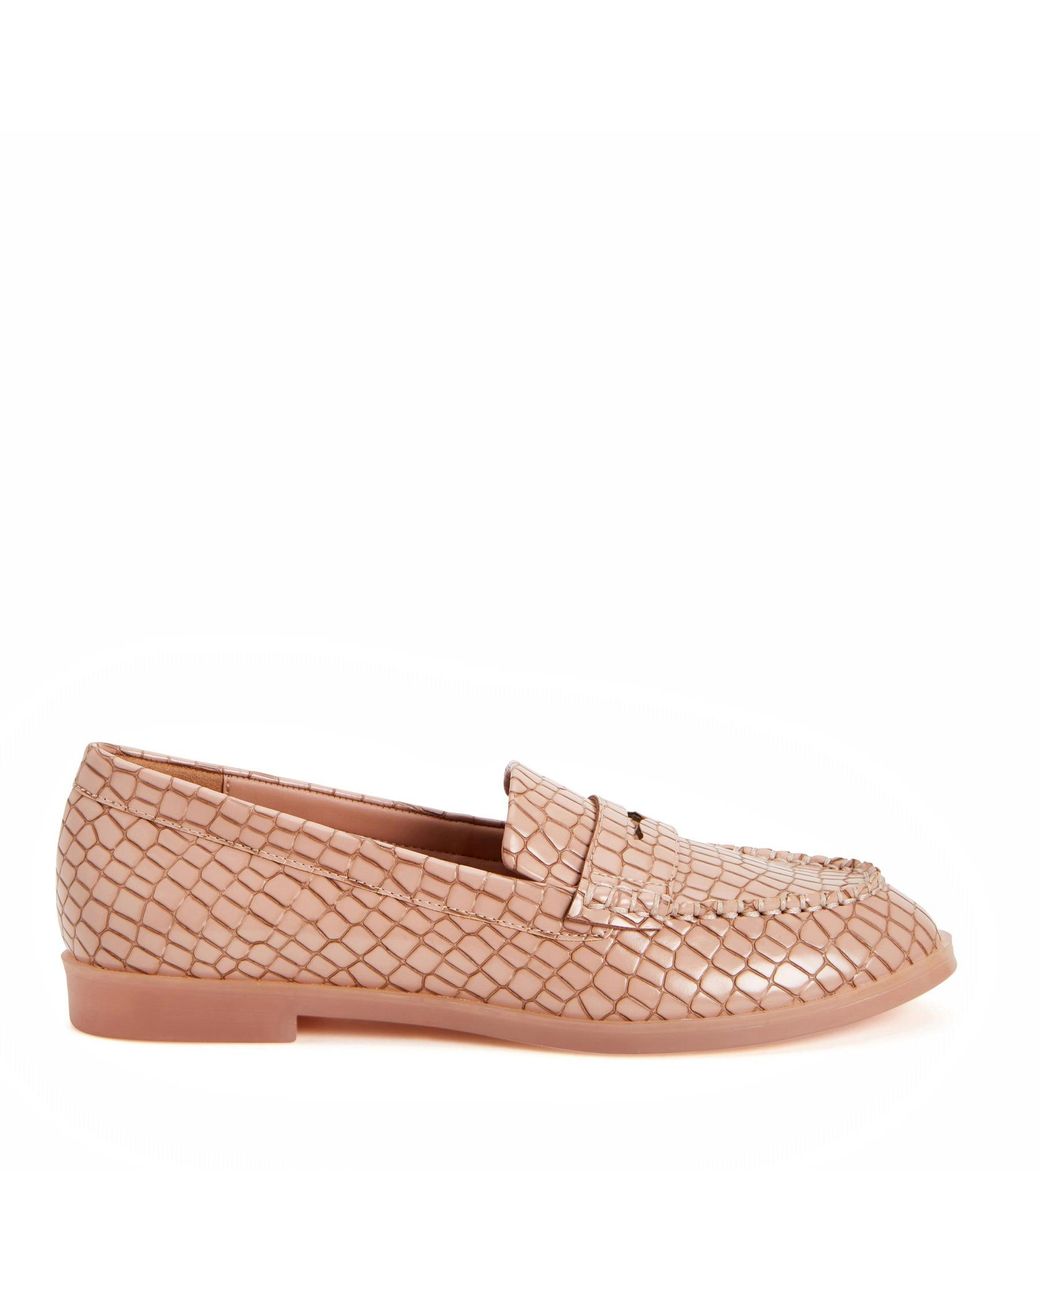 Katy Perry The Geli Loafer in Natural | Lyst